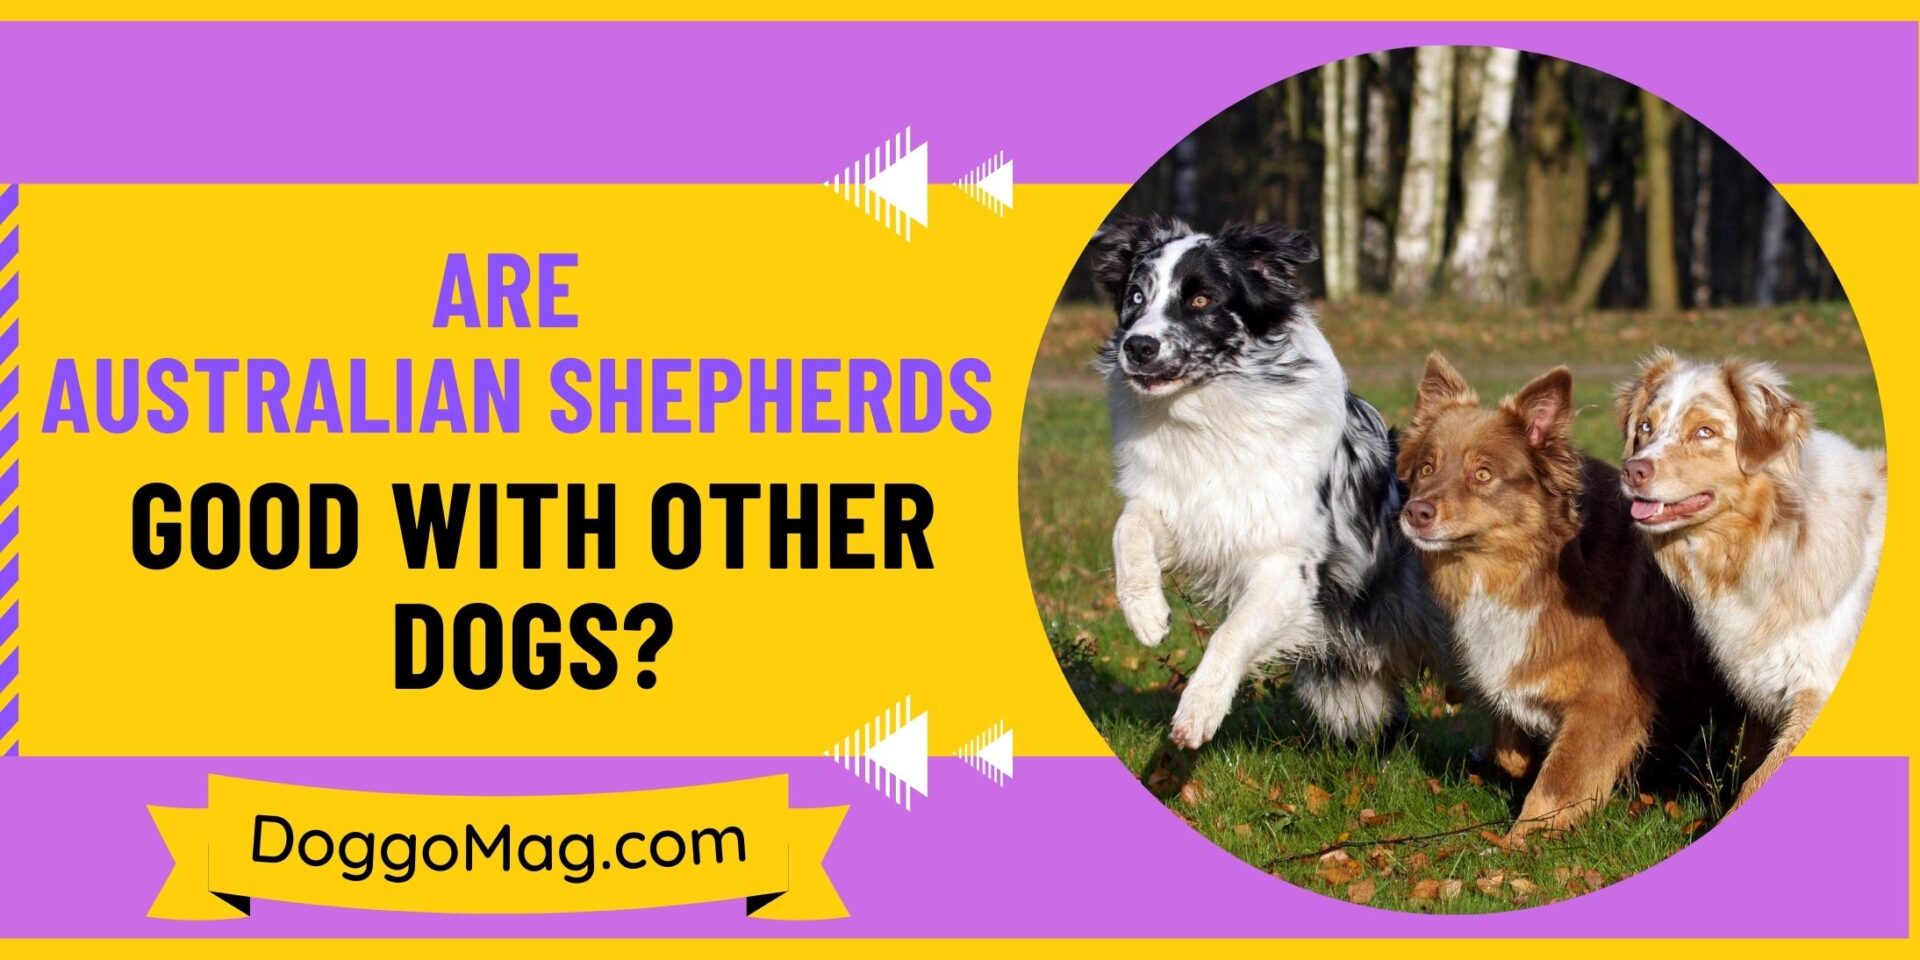 Are Australian Shepherds Good With Other Dogs